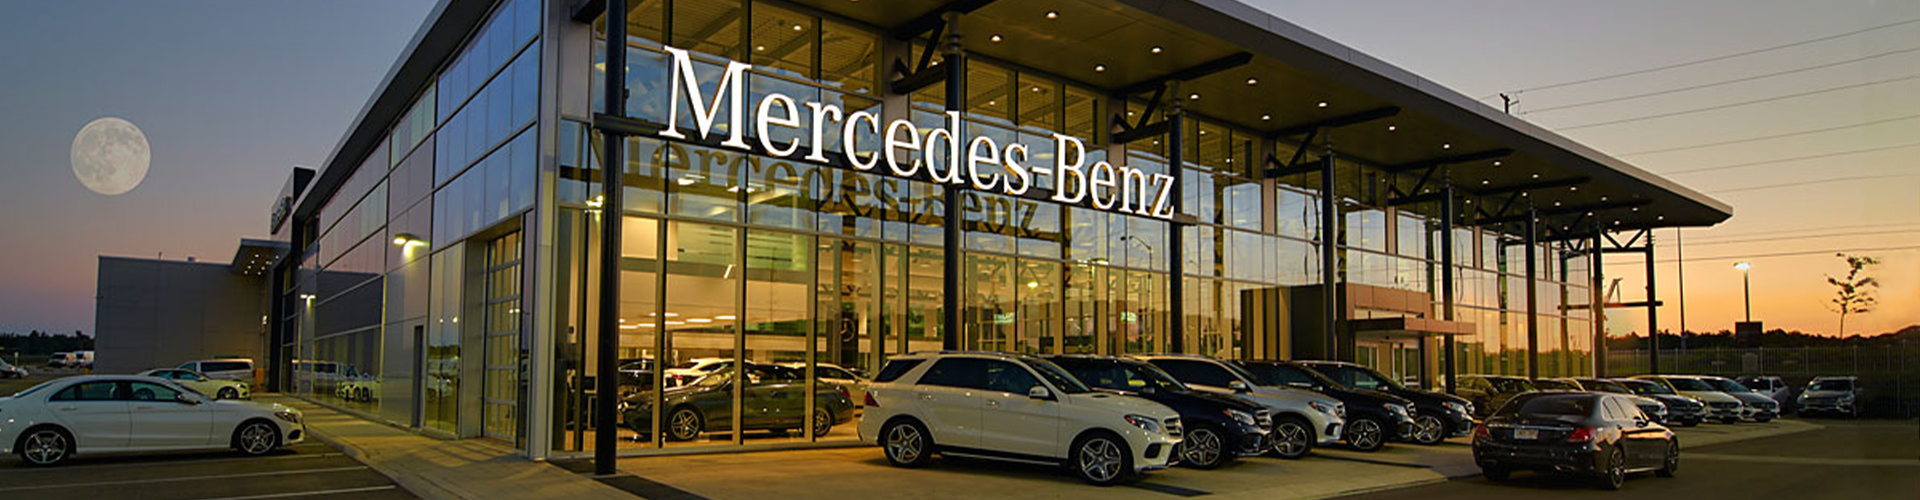 Welcome Mercedes-Benz Brampton To The Humberview Group